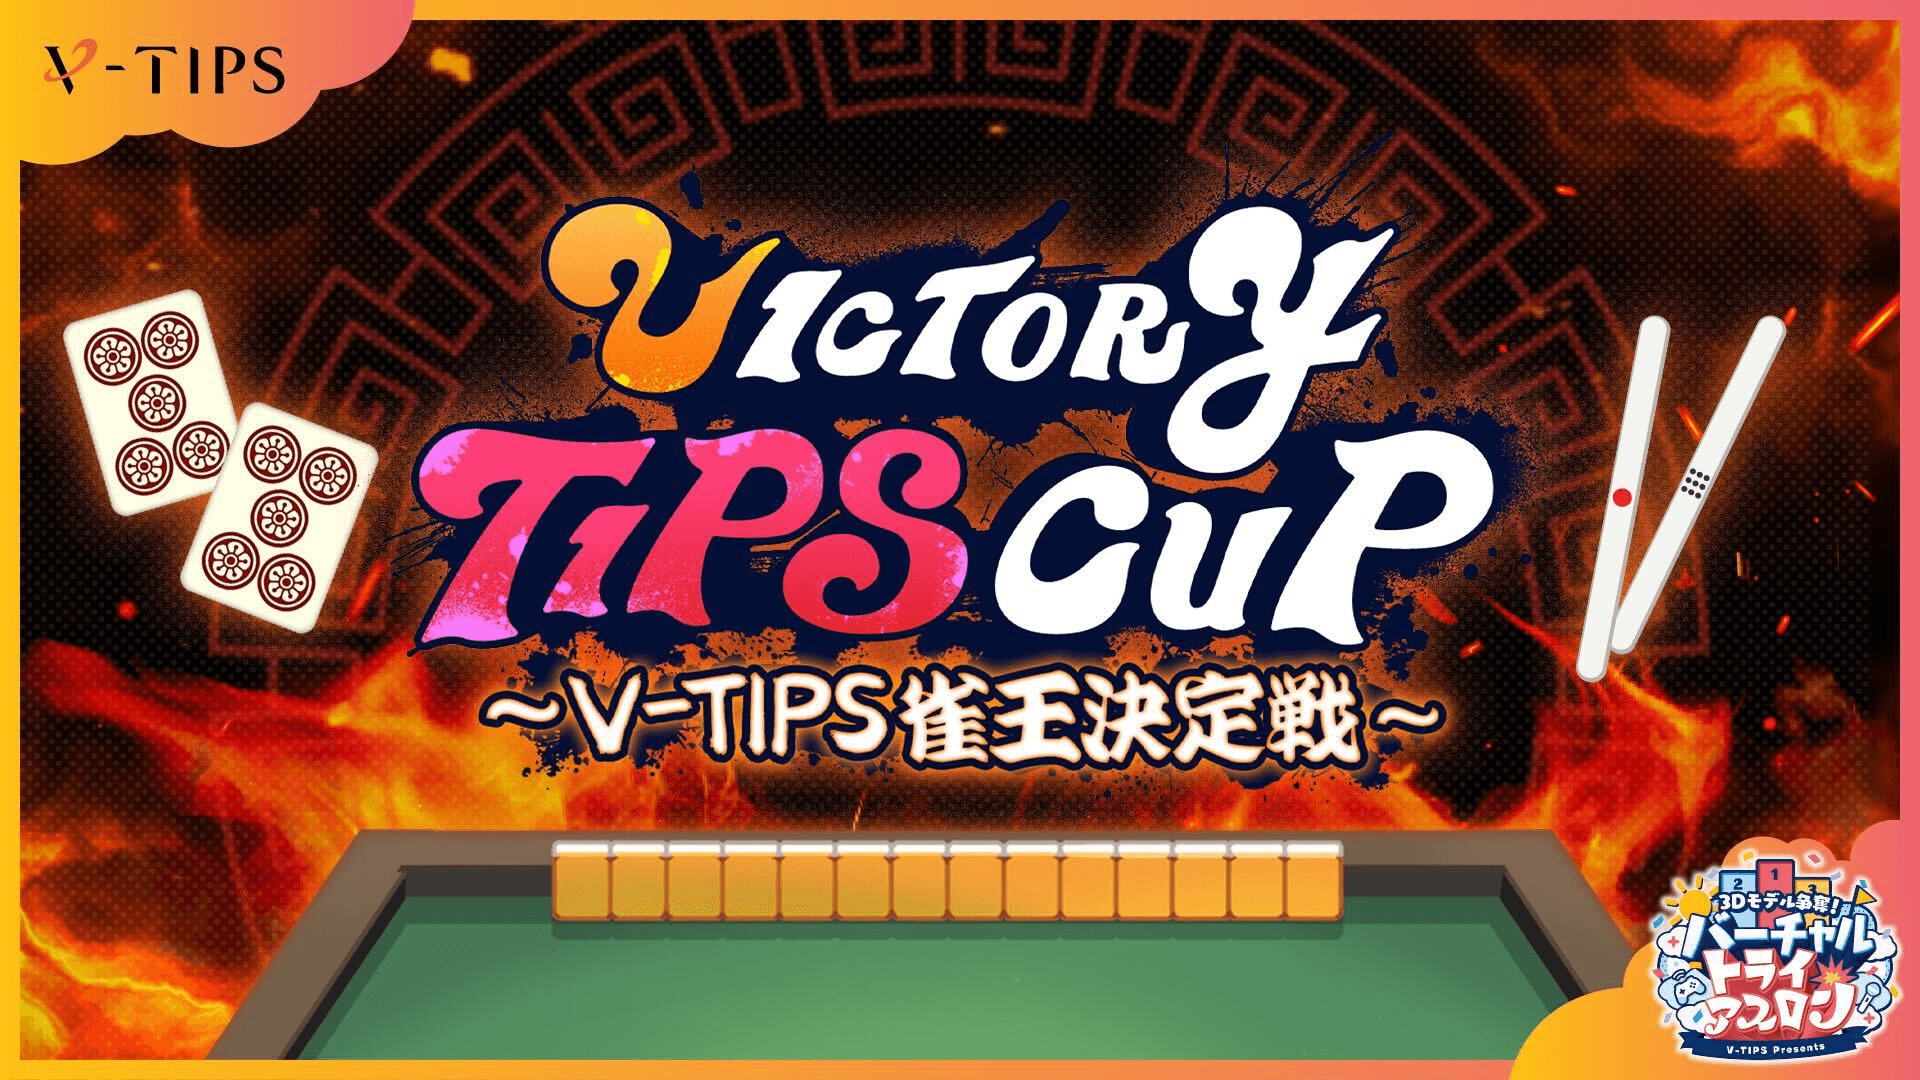 VICTORY TIPS CUP～V-TIPS雀王決定戦～ feature image